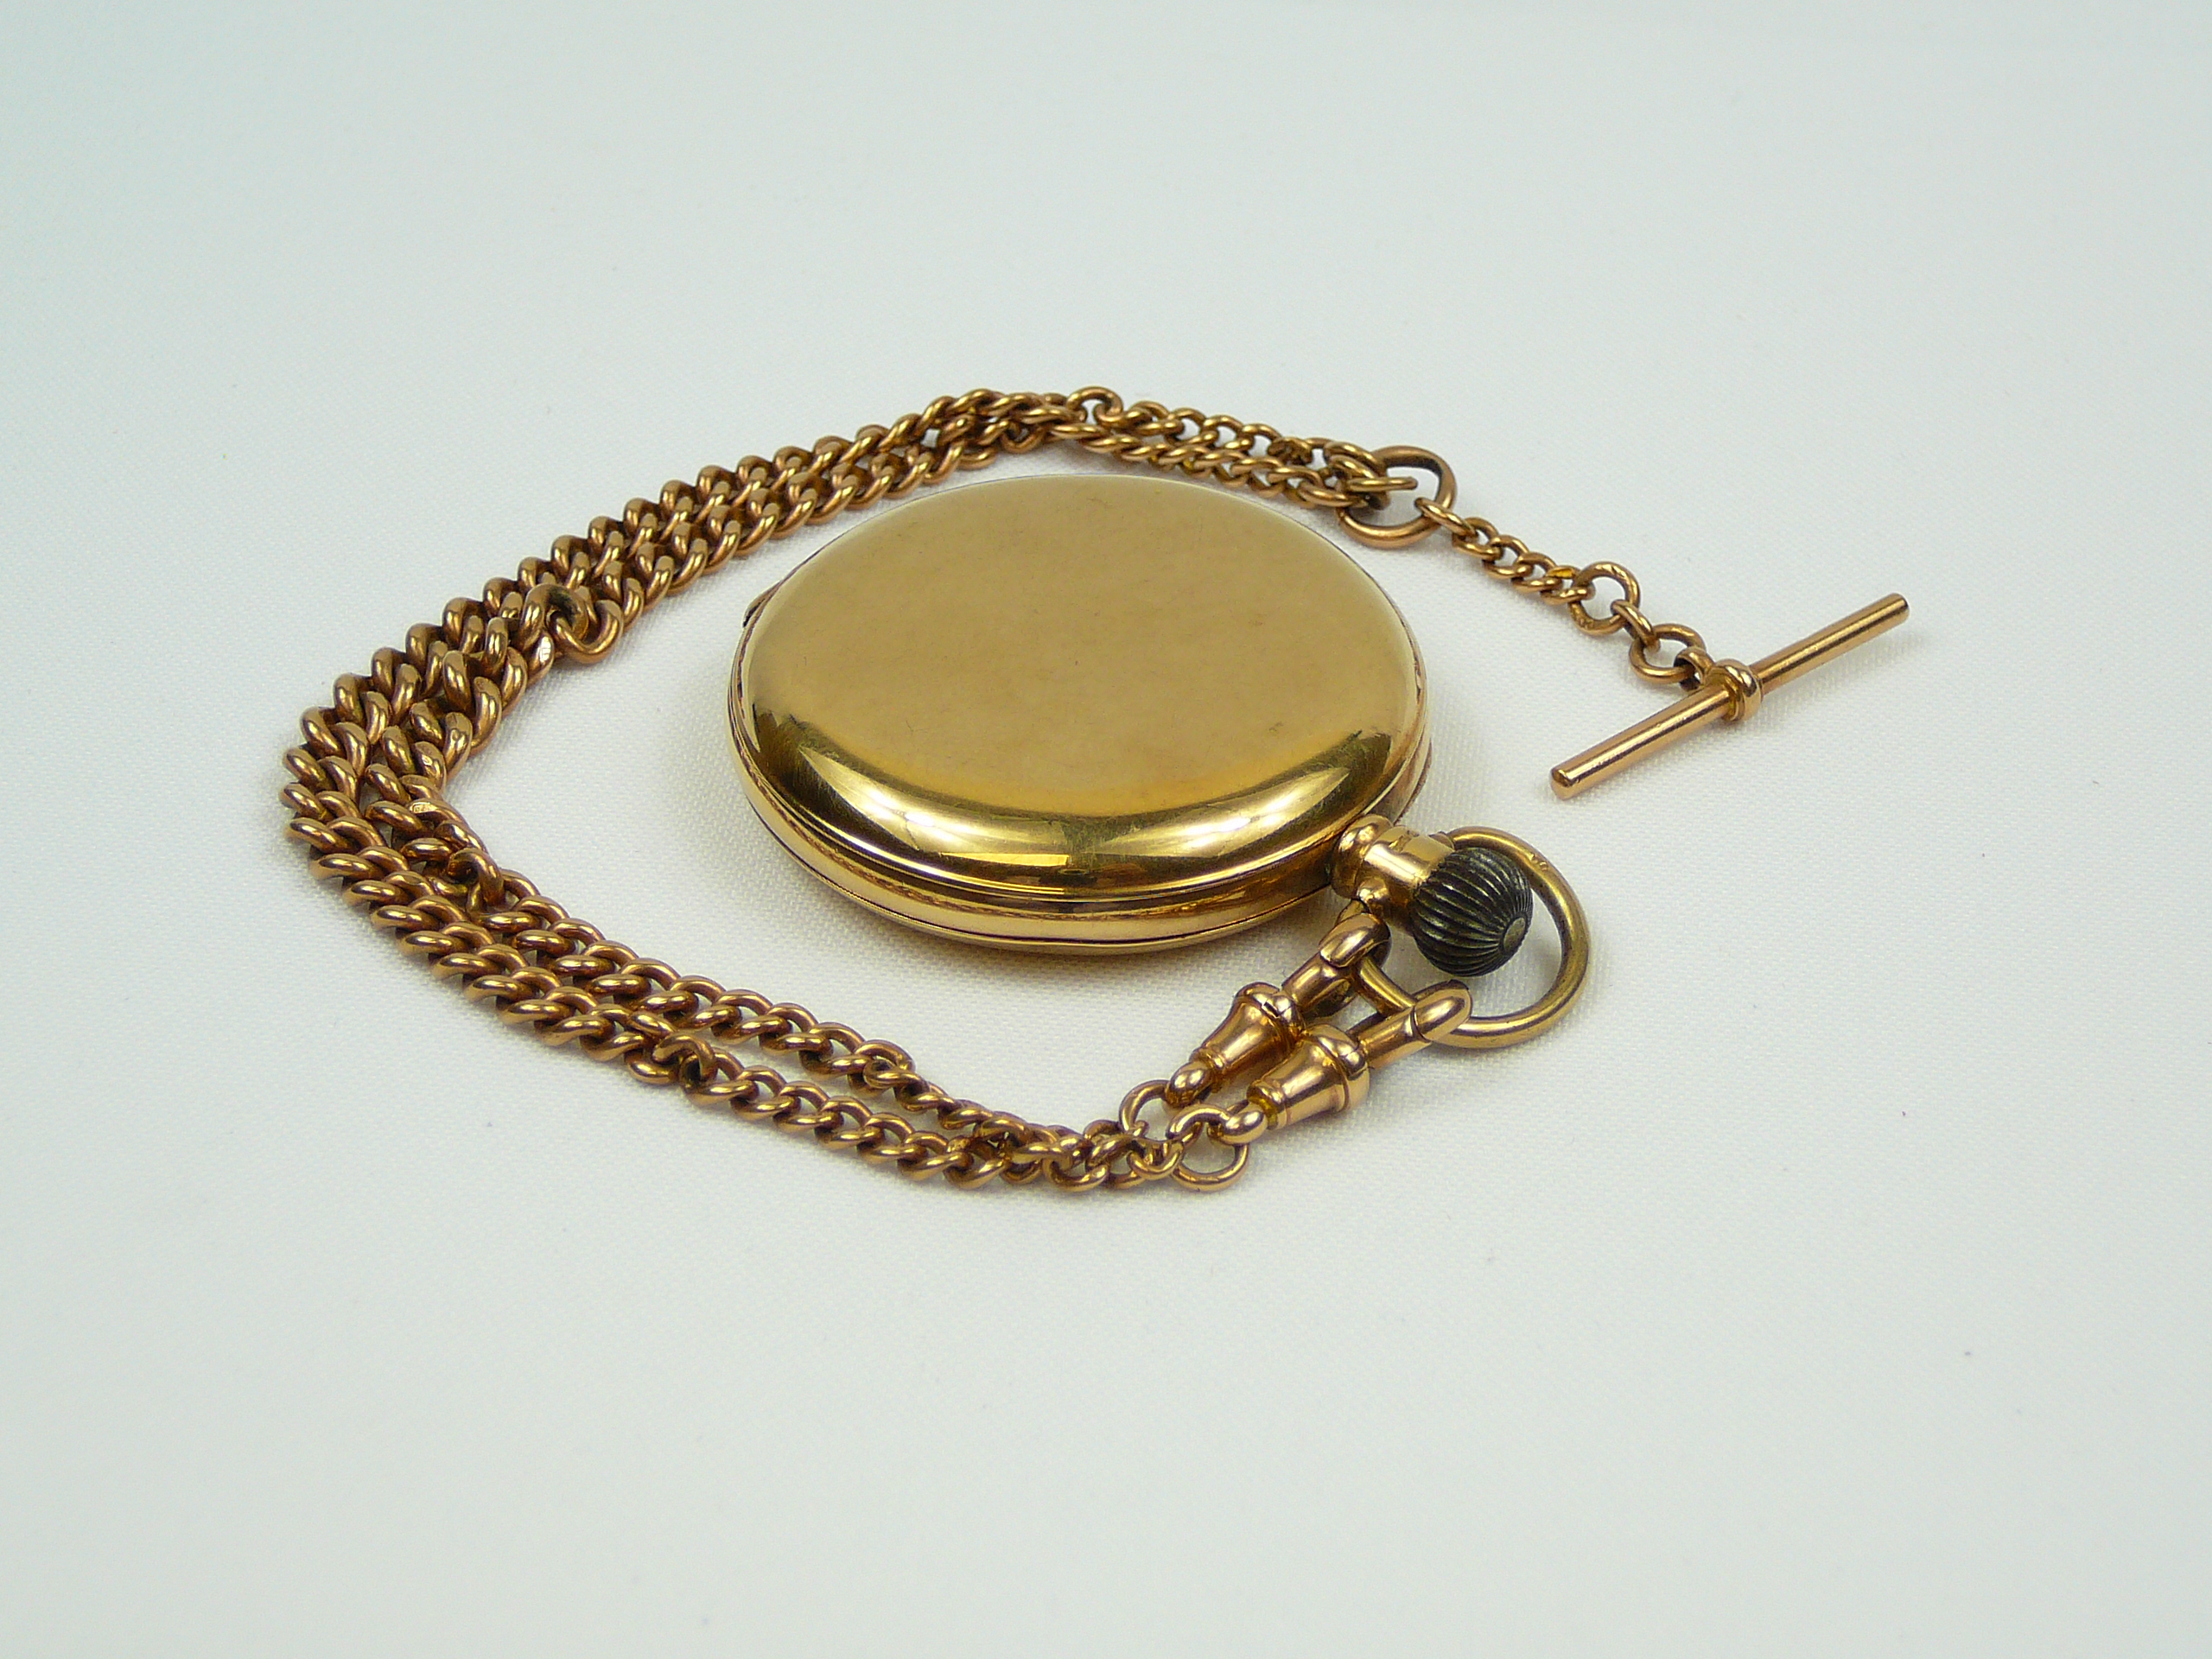 Gents gold pocket watch and chain - Image 3 of 10